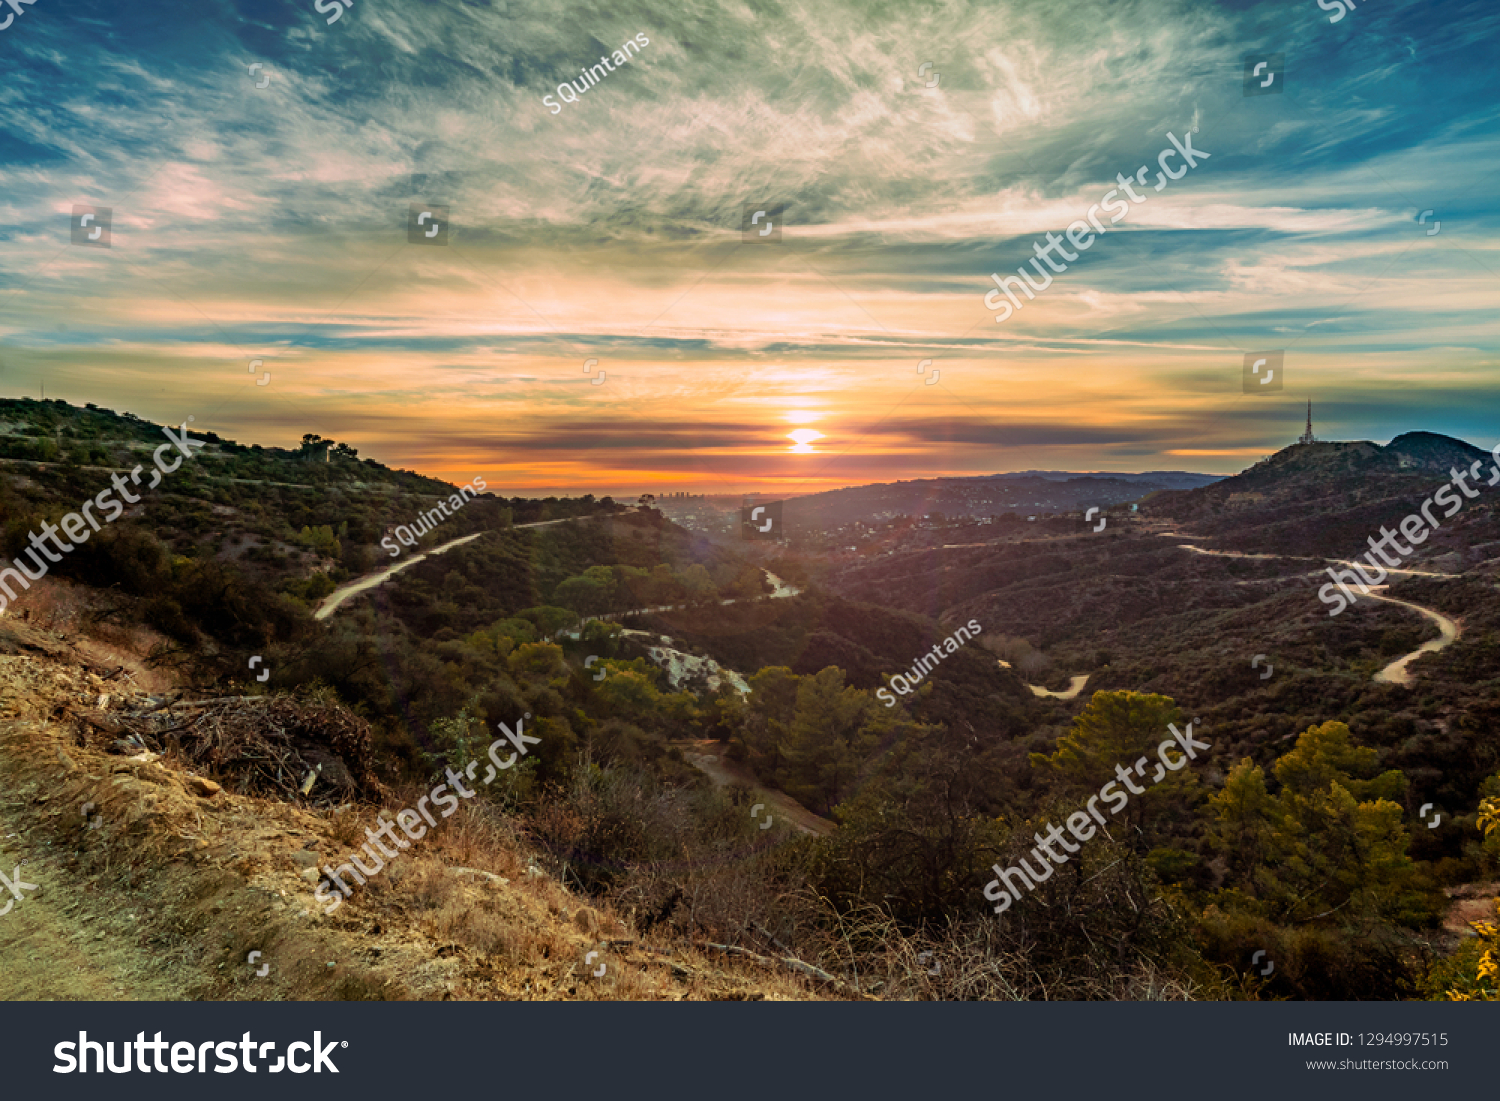 An orange sunset view across the horizon between hills and mountains from a distant mountain top view in Los Angeles, California. #1294997515